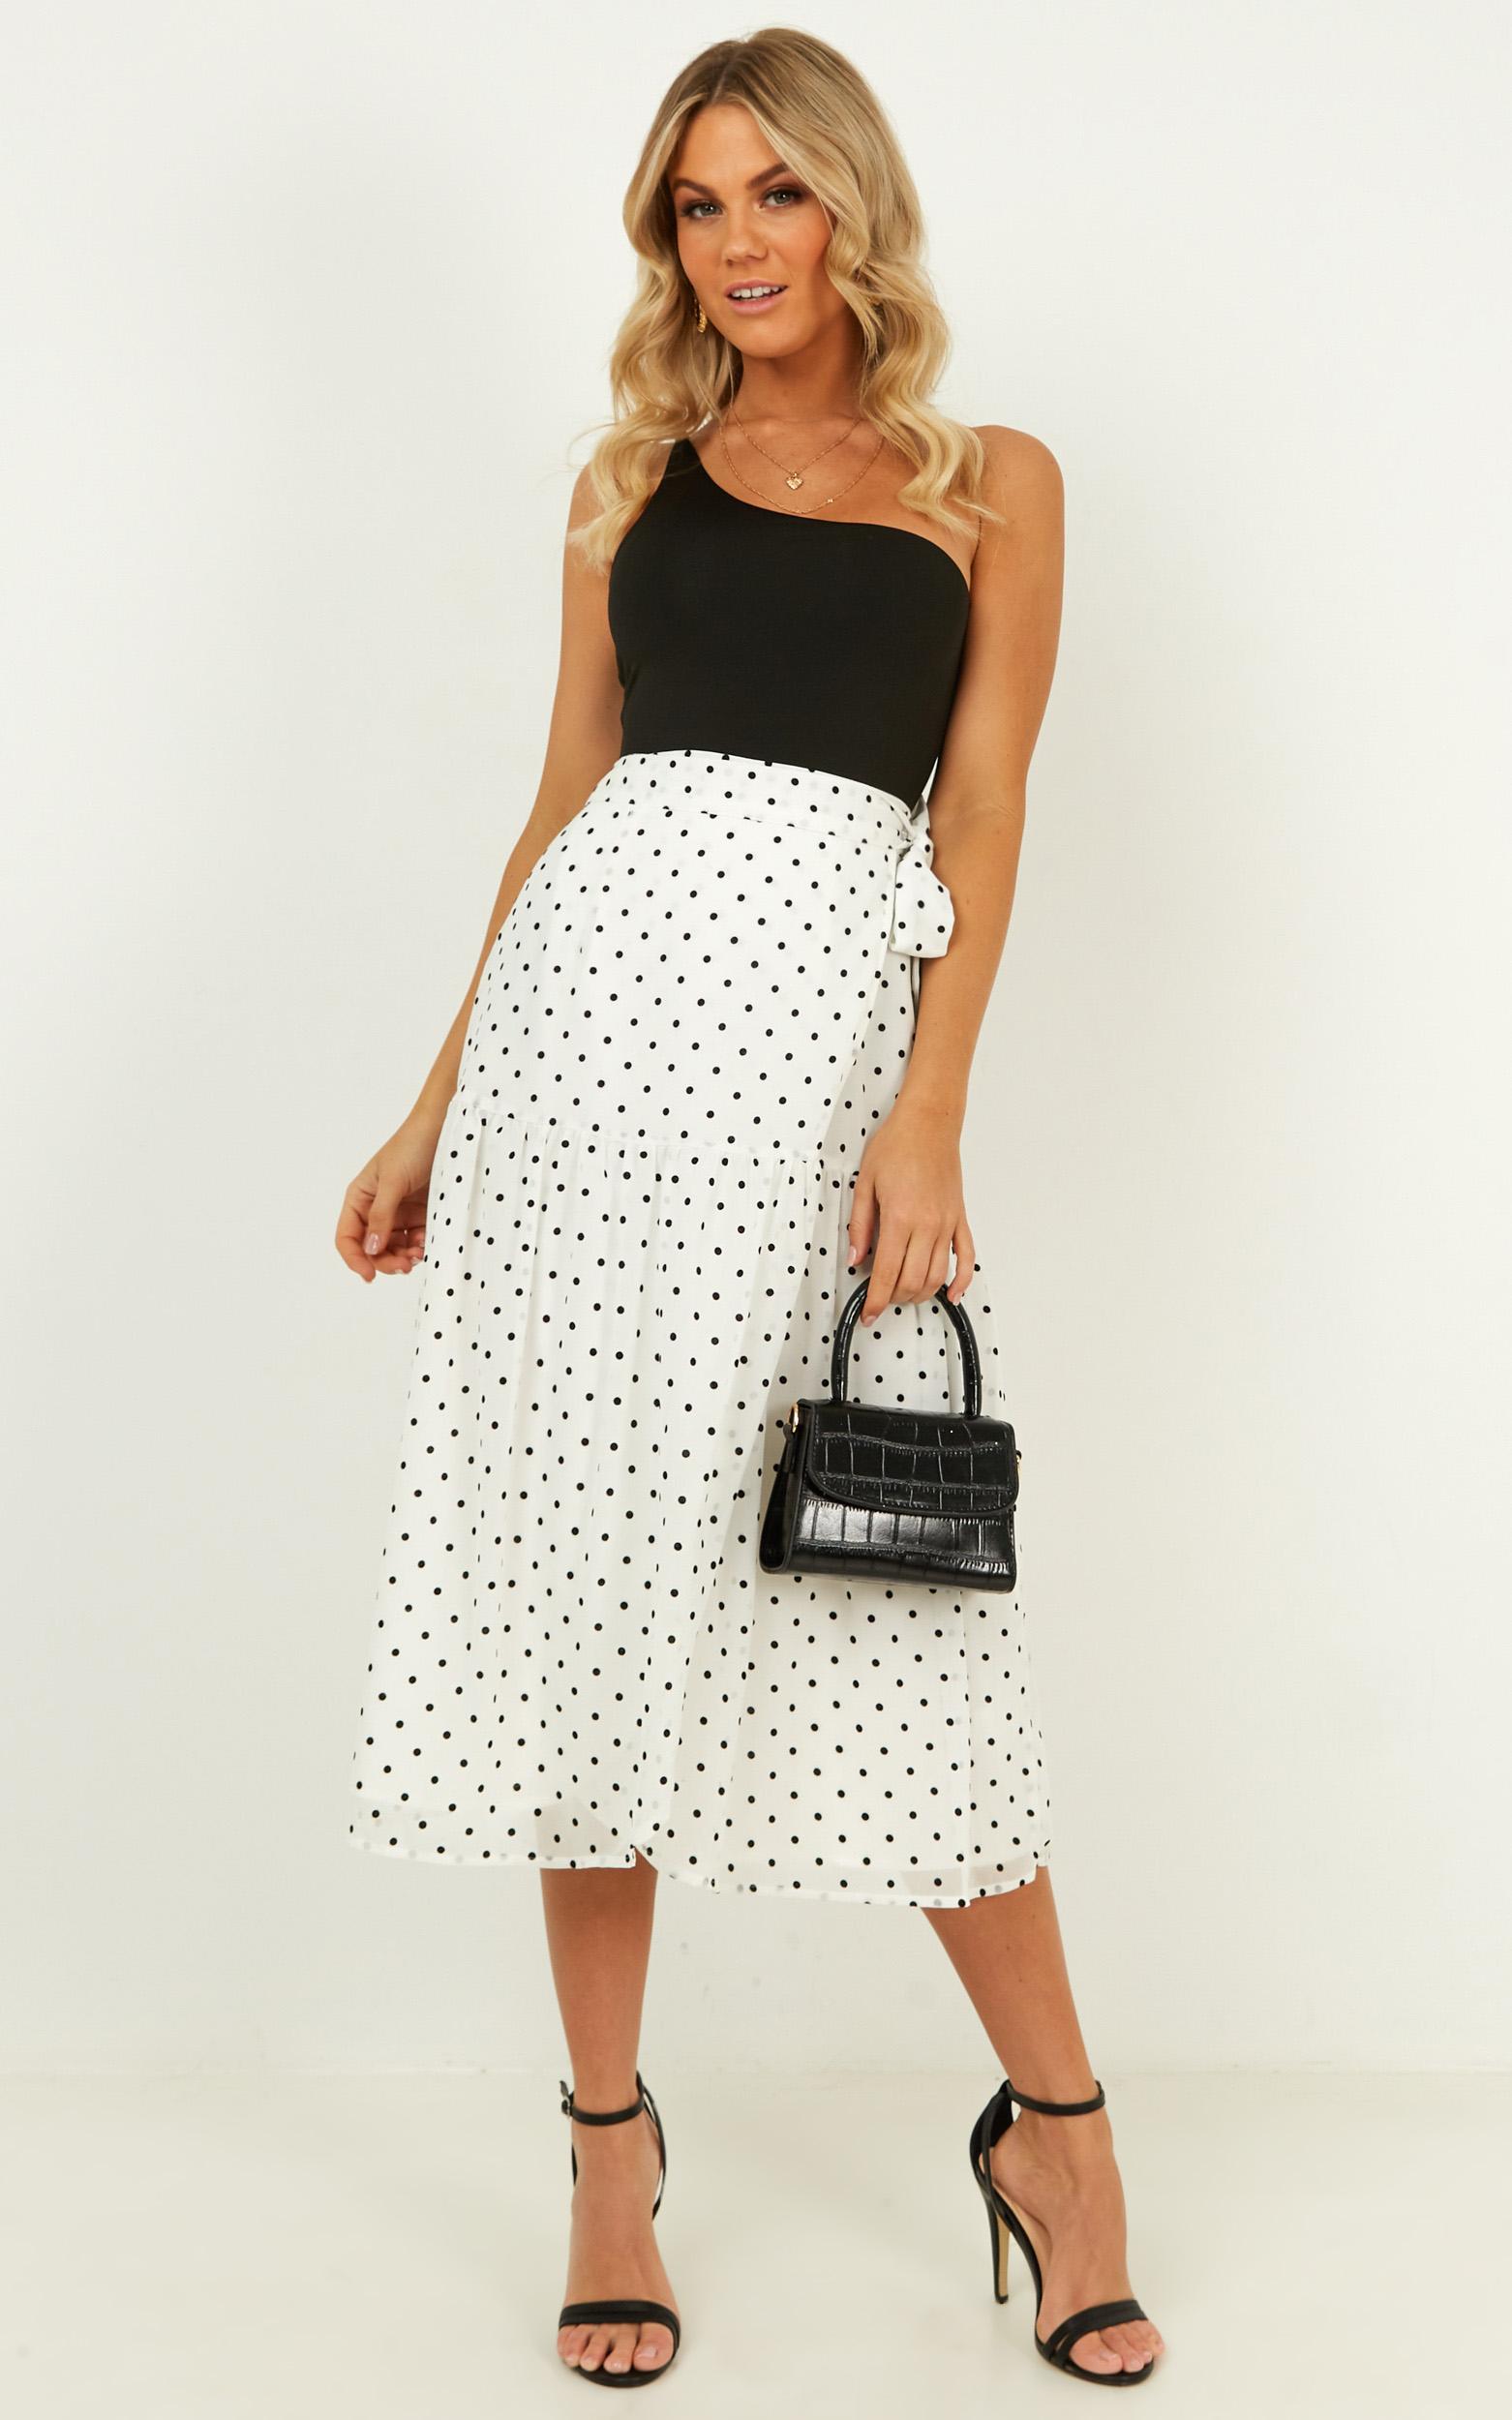 Things On My Mind Skirt In black spot - 12 (L), Black, hi-res image number null